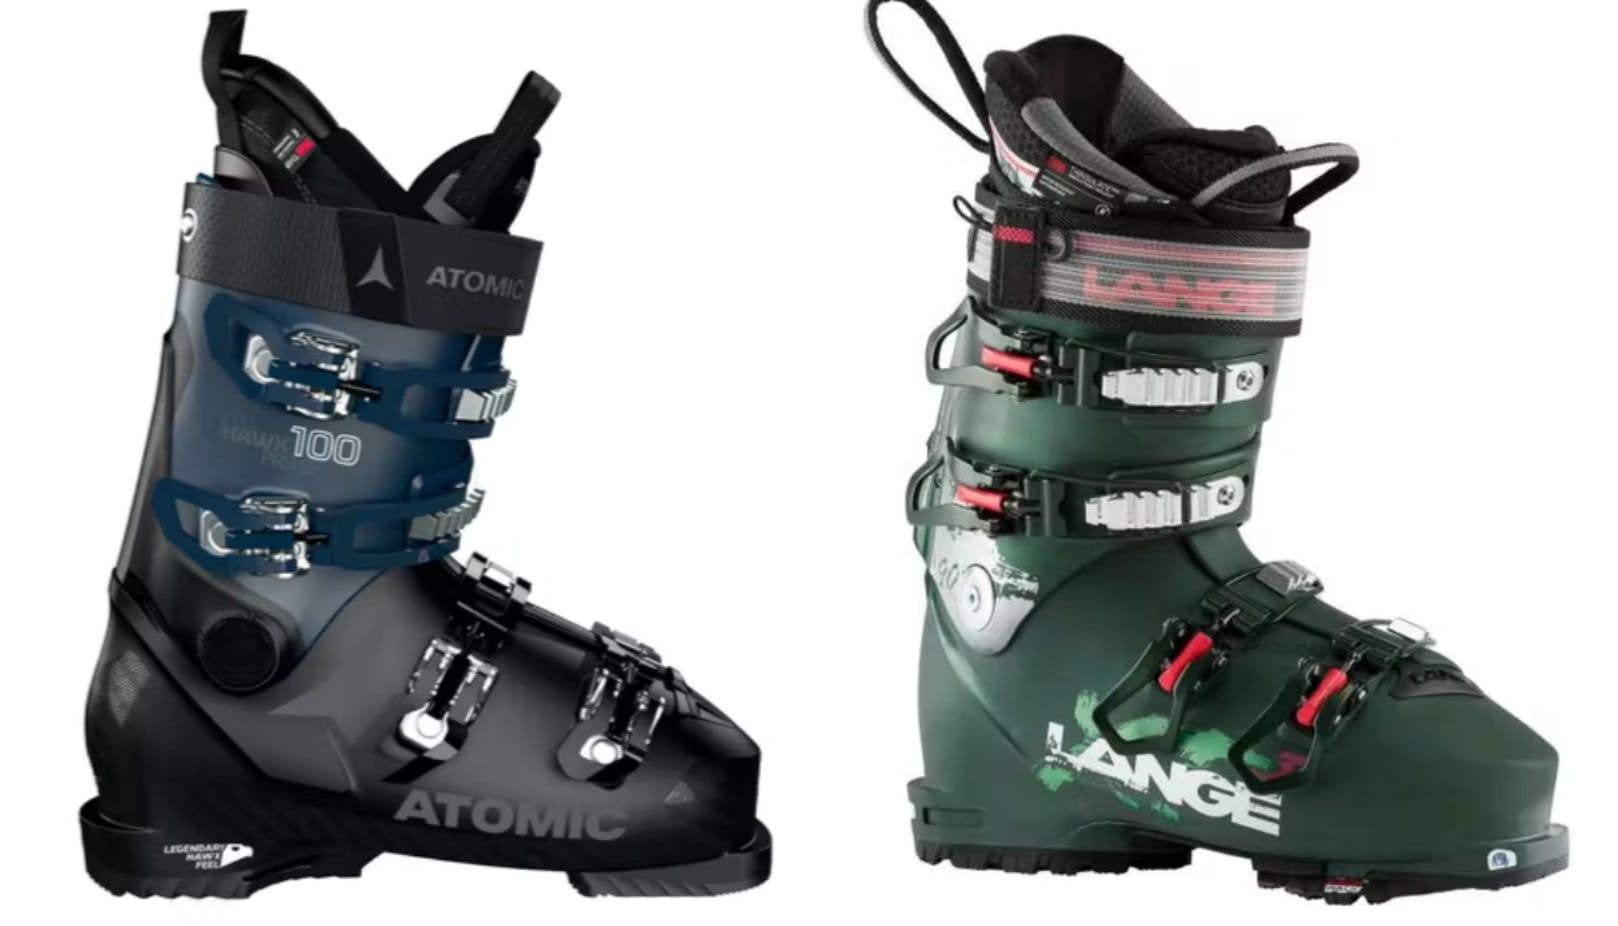 Two ski boots The Men's Atomic Hawx Prime 100  on the left and the Women's XT3 Lange 90 on the right.